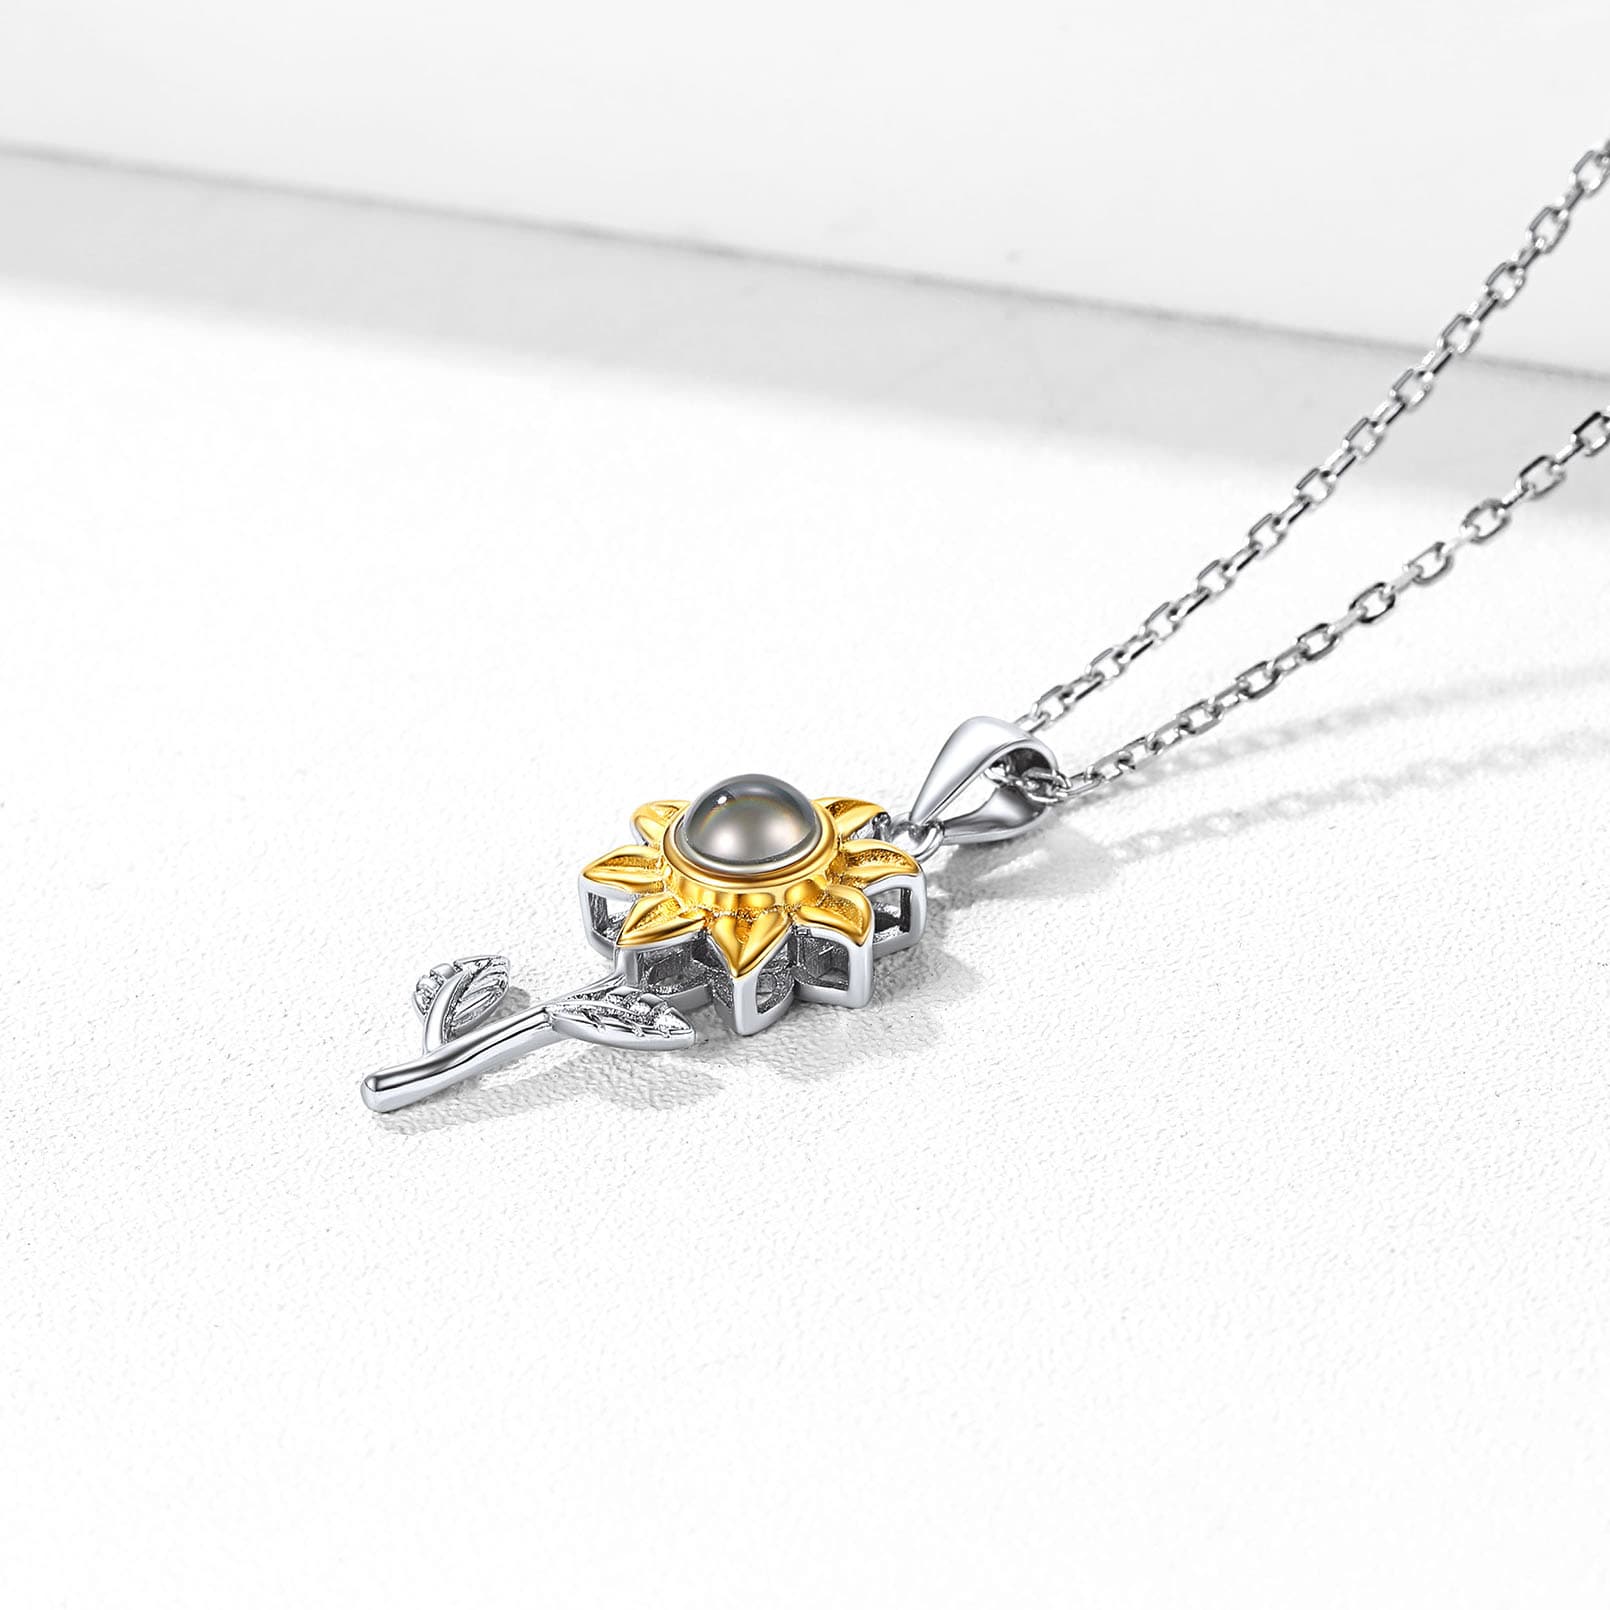 Exquisite Fashion Lovely Ladies 925 Sterling Silver 18K Gold Sunflower  Pendant Necklace 